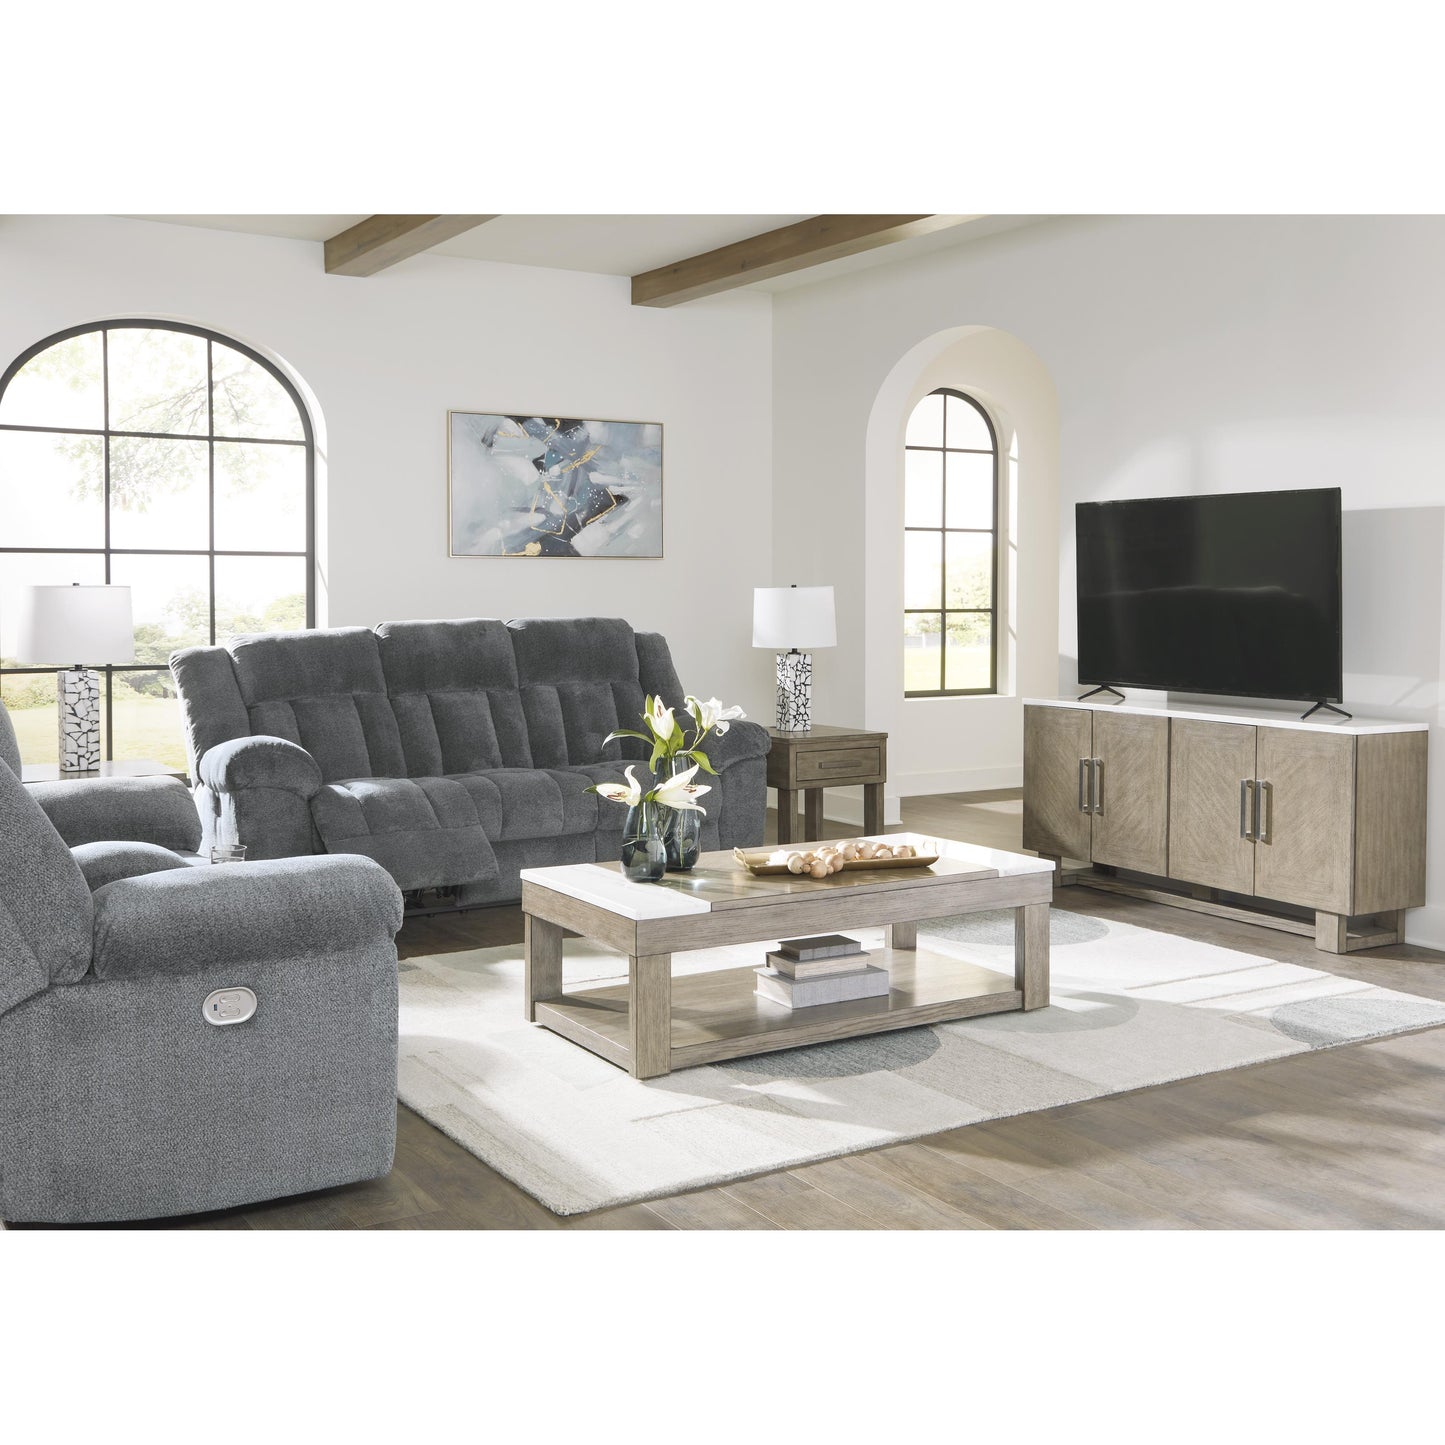 Signature Design by Ashley Tip-Off Power Reclining Sofa 6930415 IMAGE 11